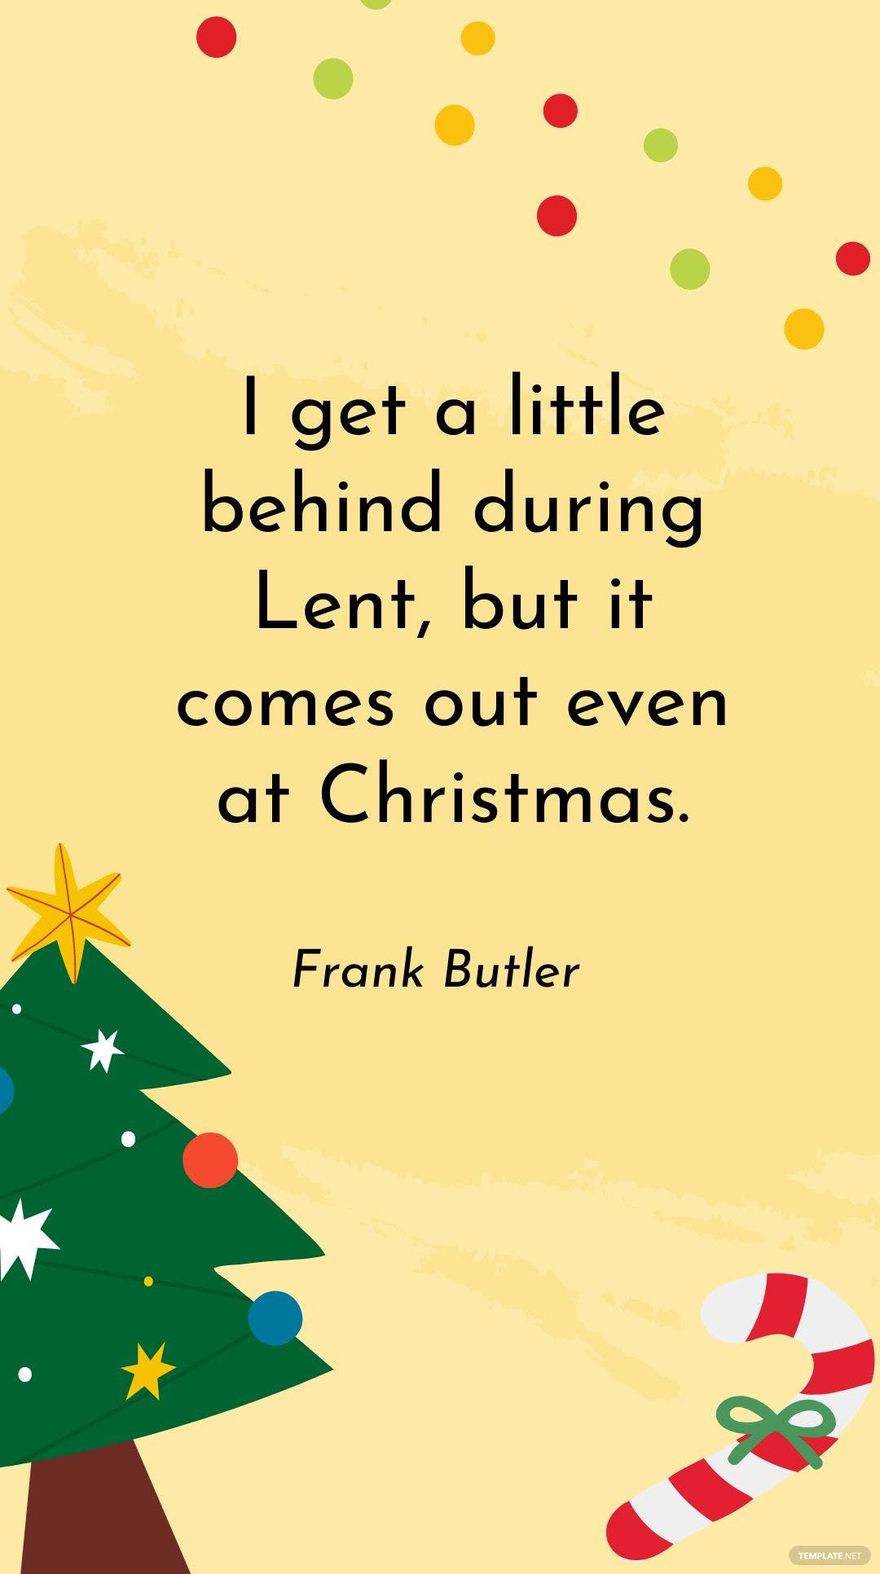 Frank Butler - I get a little behind during Lent, but it comes out even at Christmas.